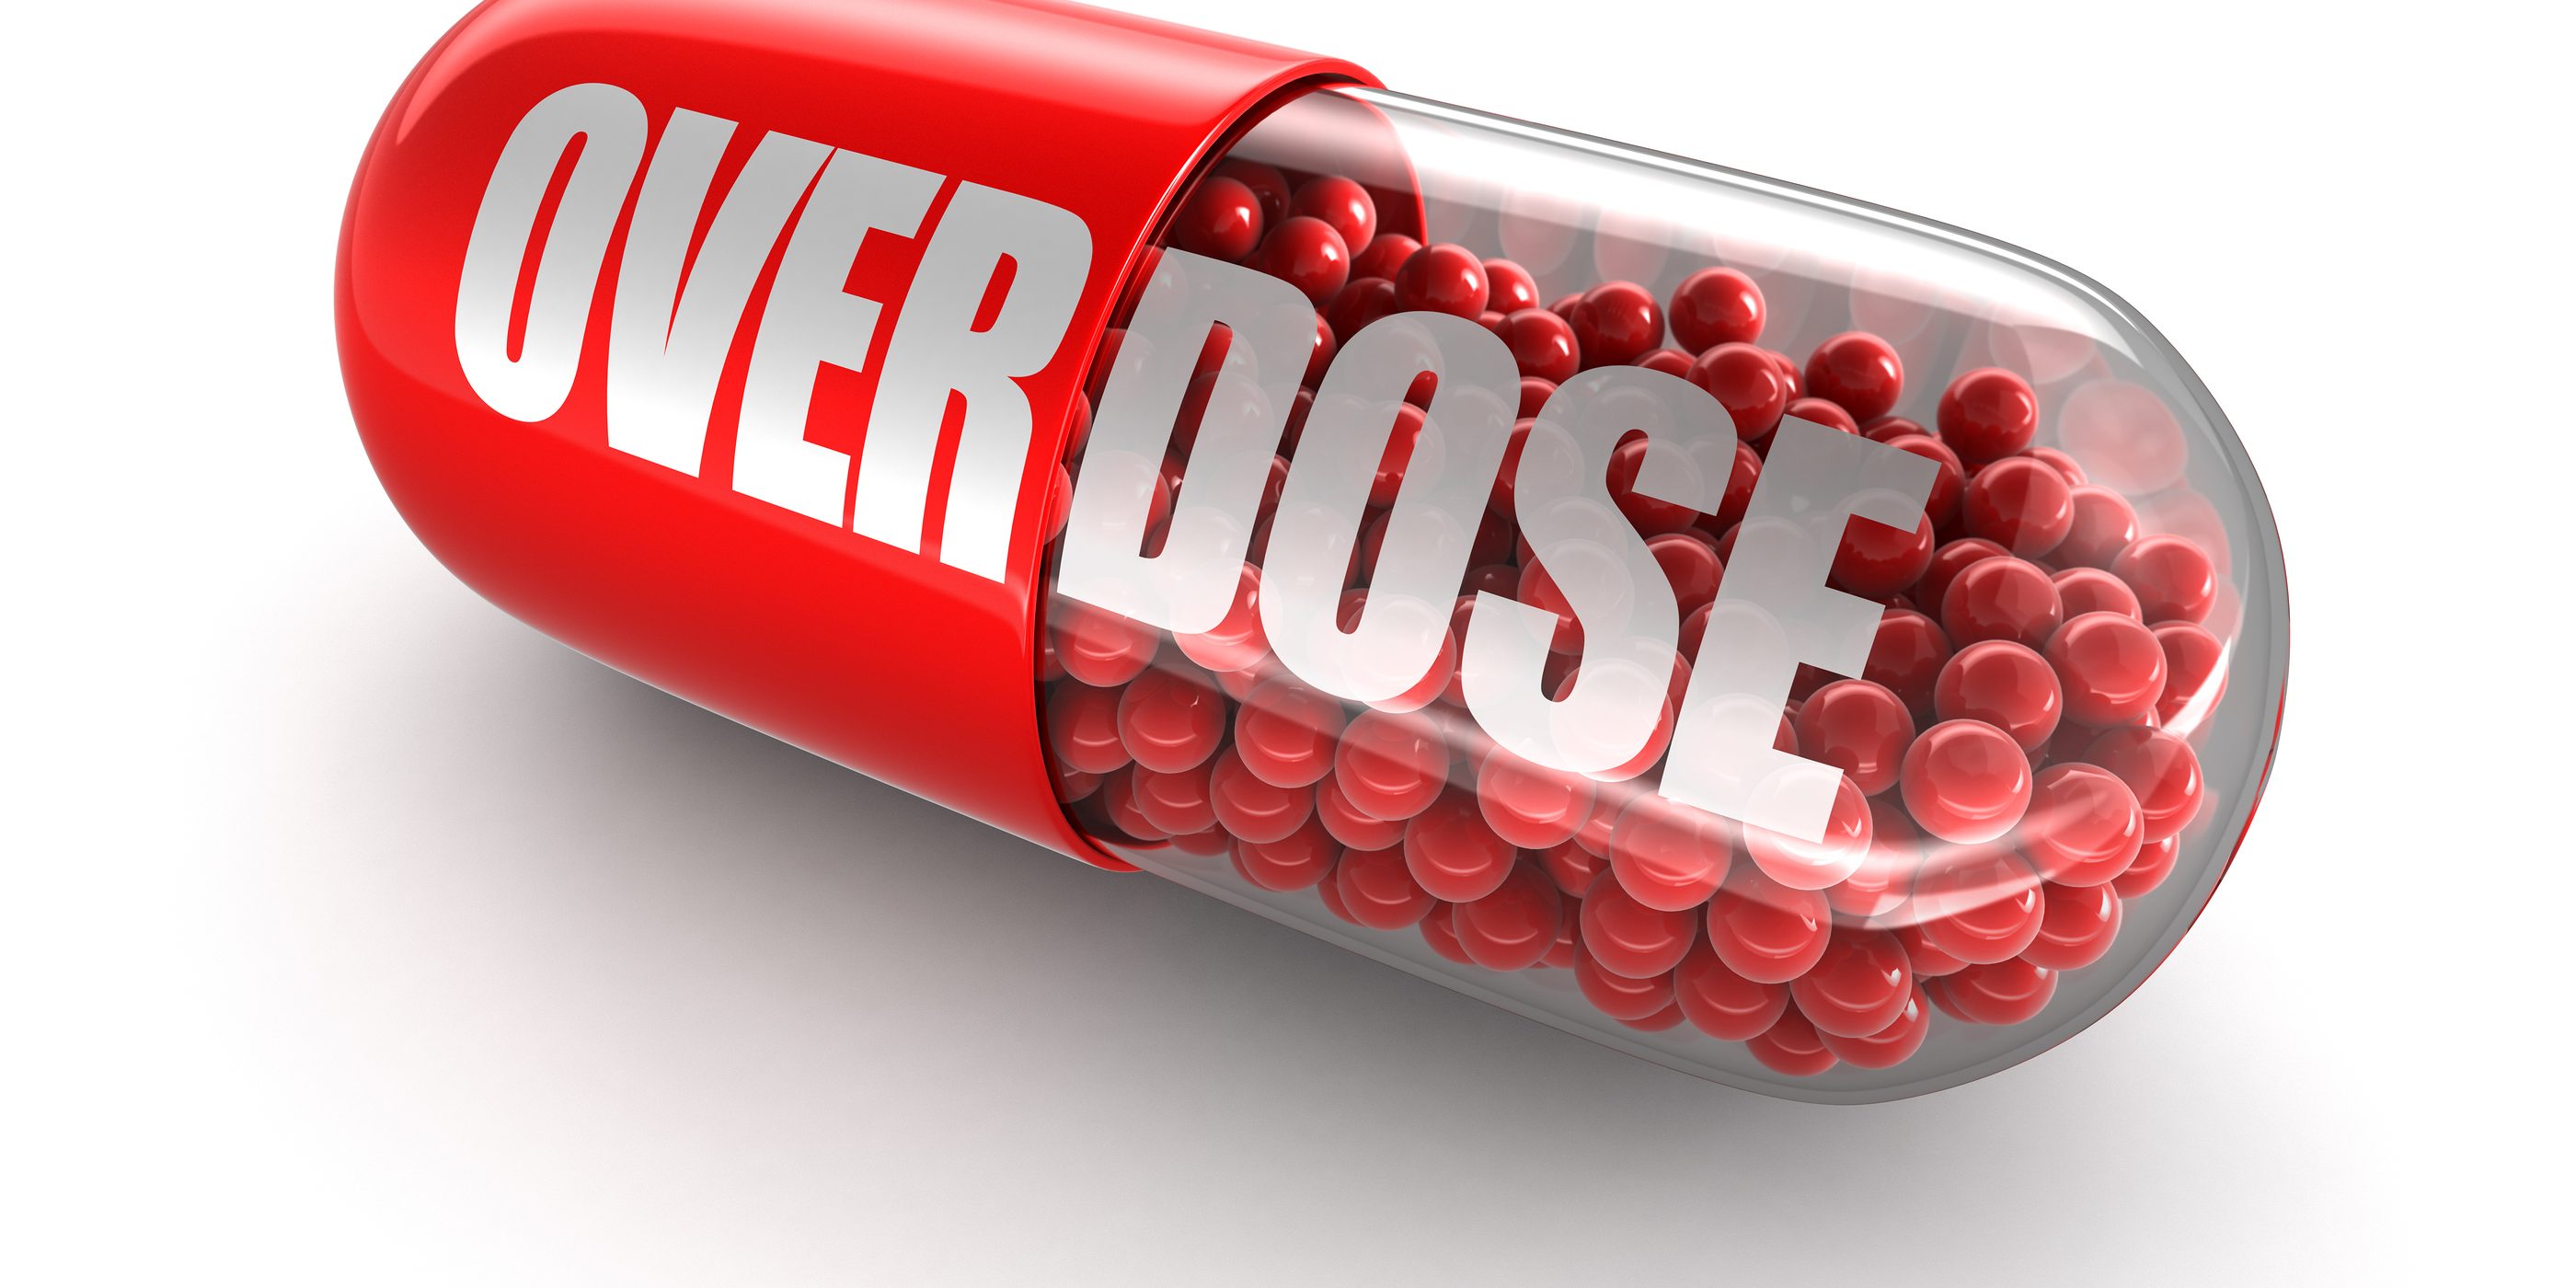 Pill Overdose. 3d Image with clipping path